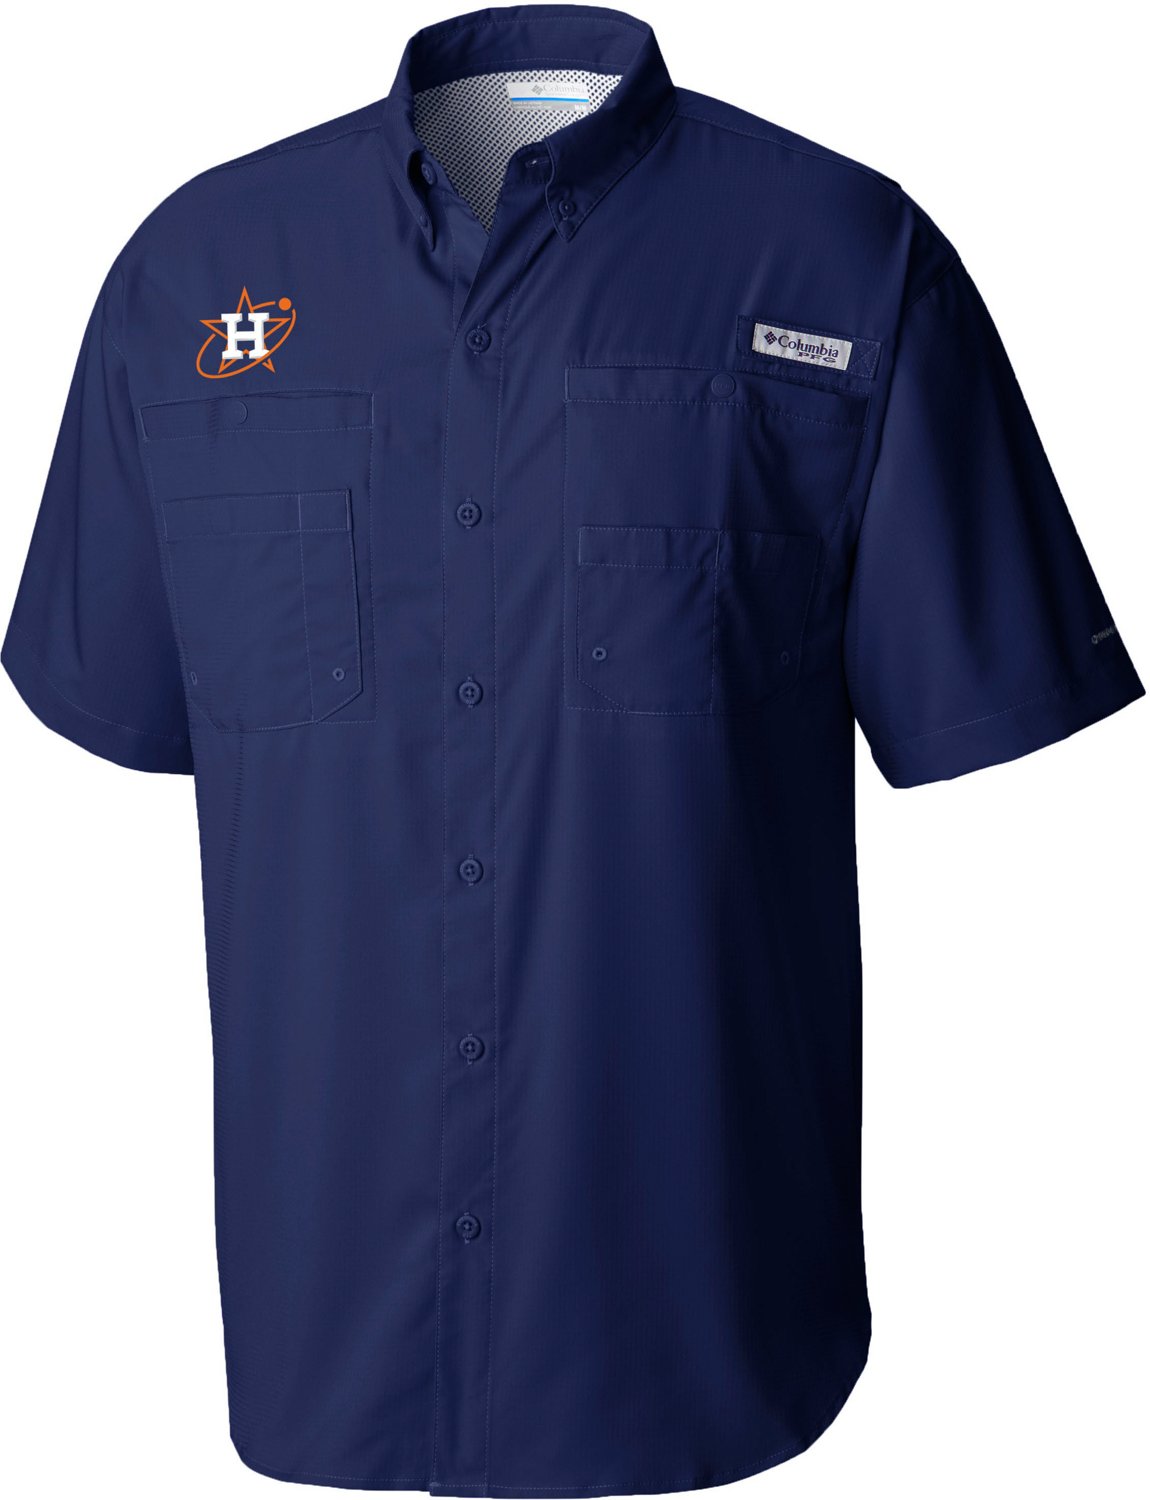 Astros Collared Shirts